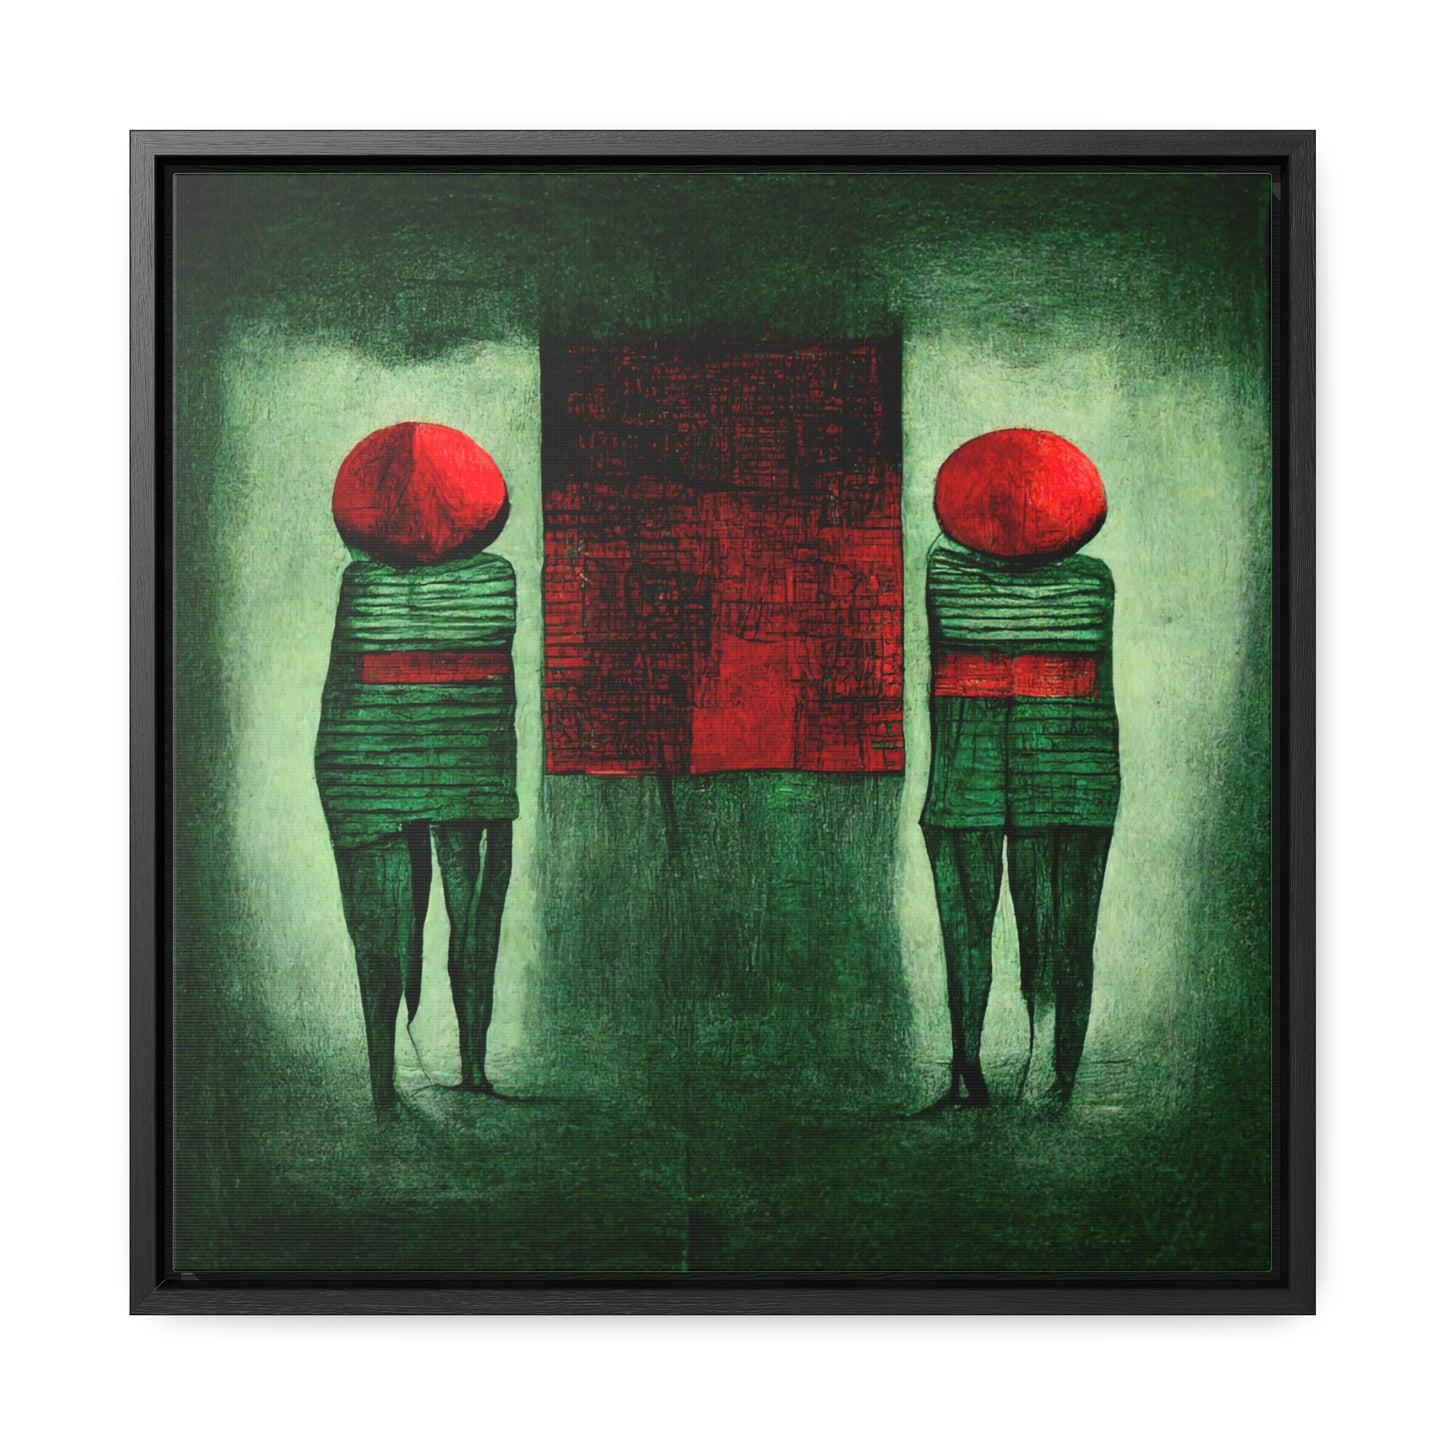 Loneliness Green Red 23, Valentinii, Gallery Canvas Wraps, Square Frame